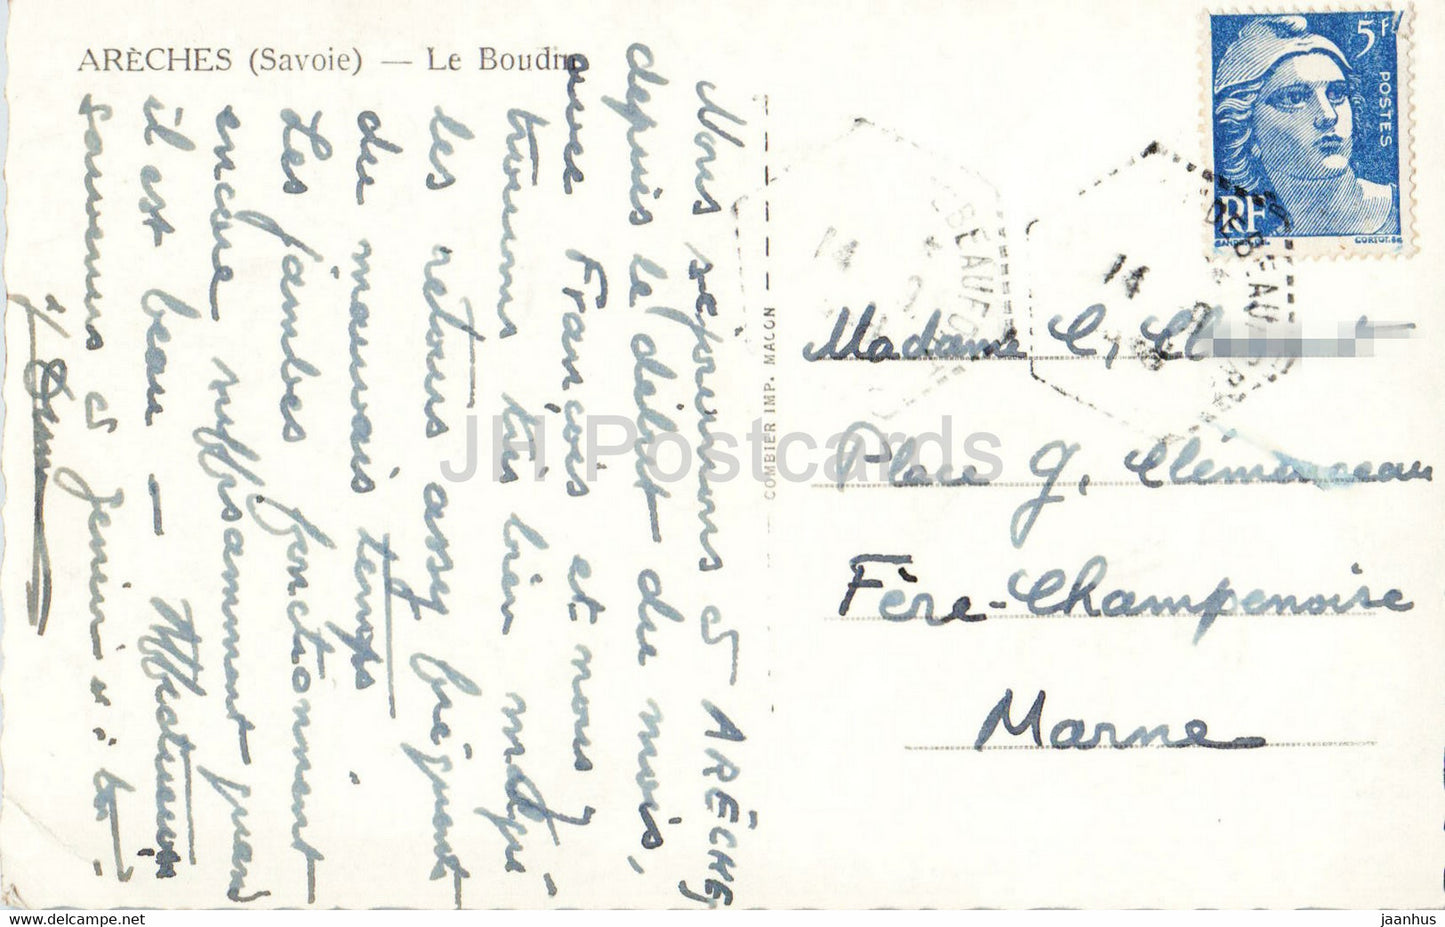 Areches - Le Boudin - old postcard - France - used